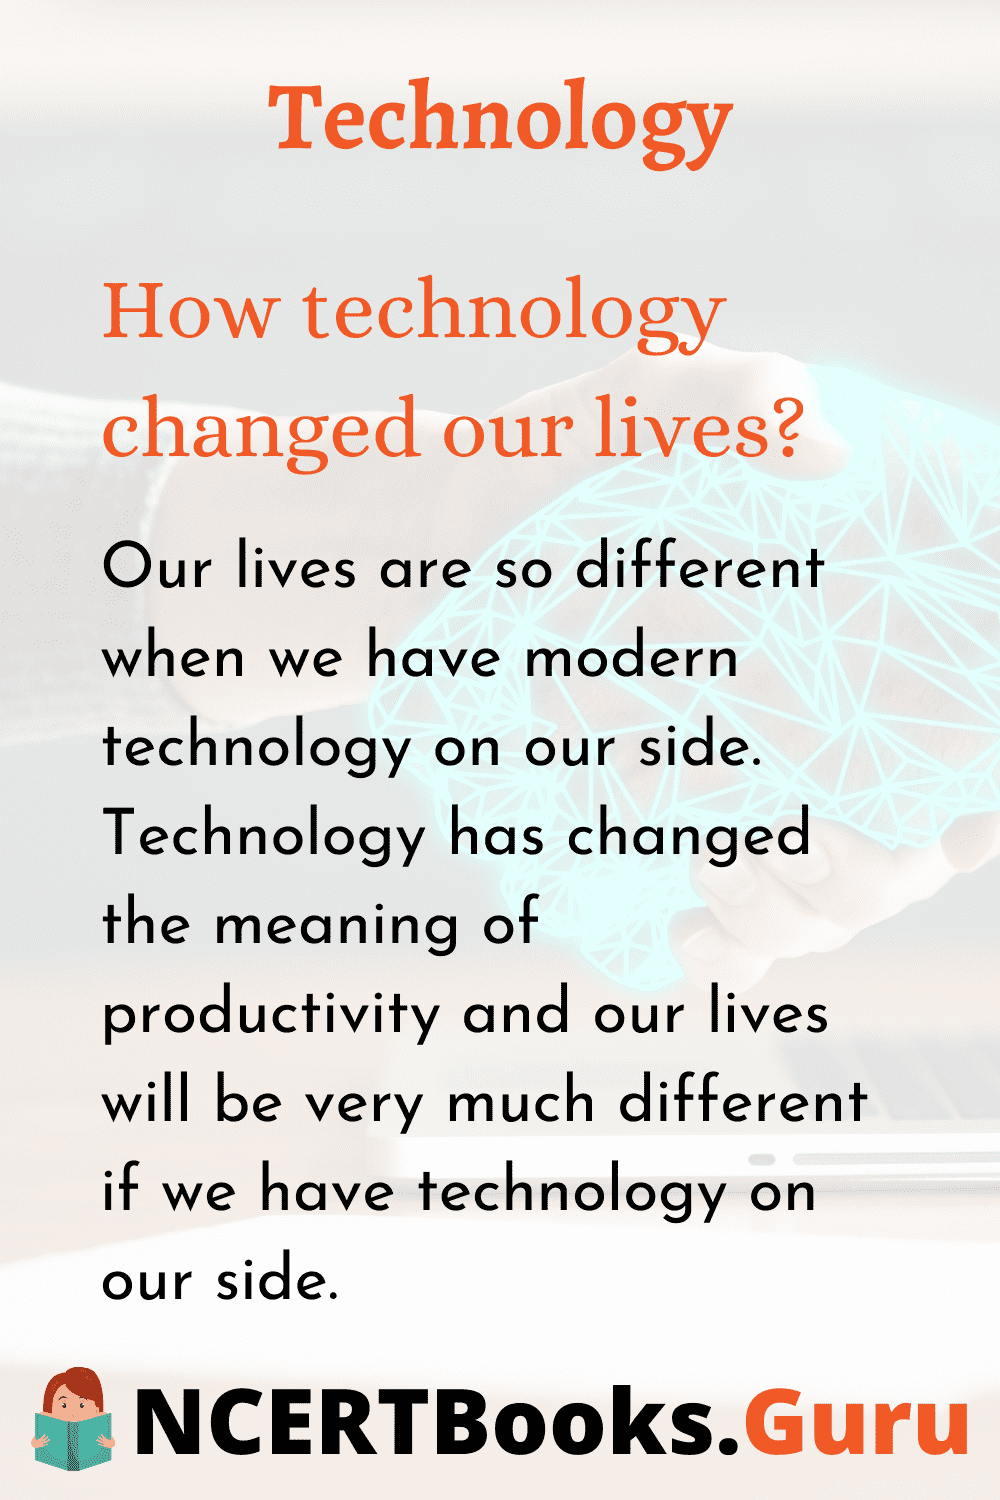 How technology changed our lives